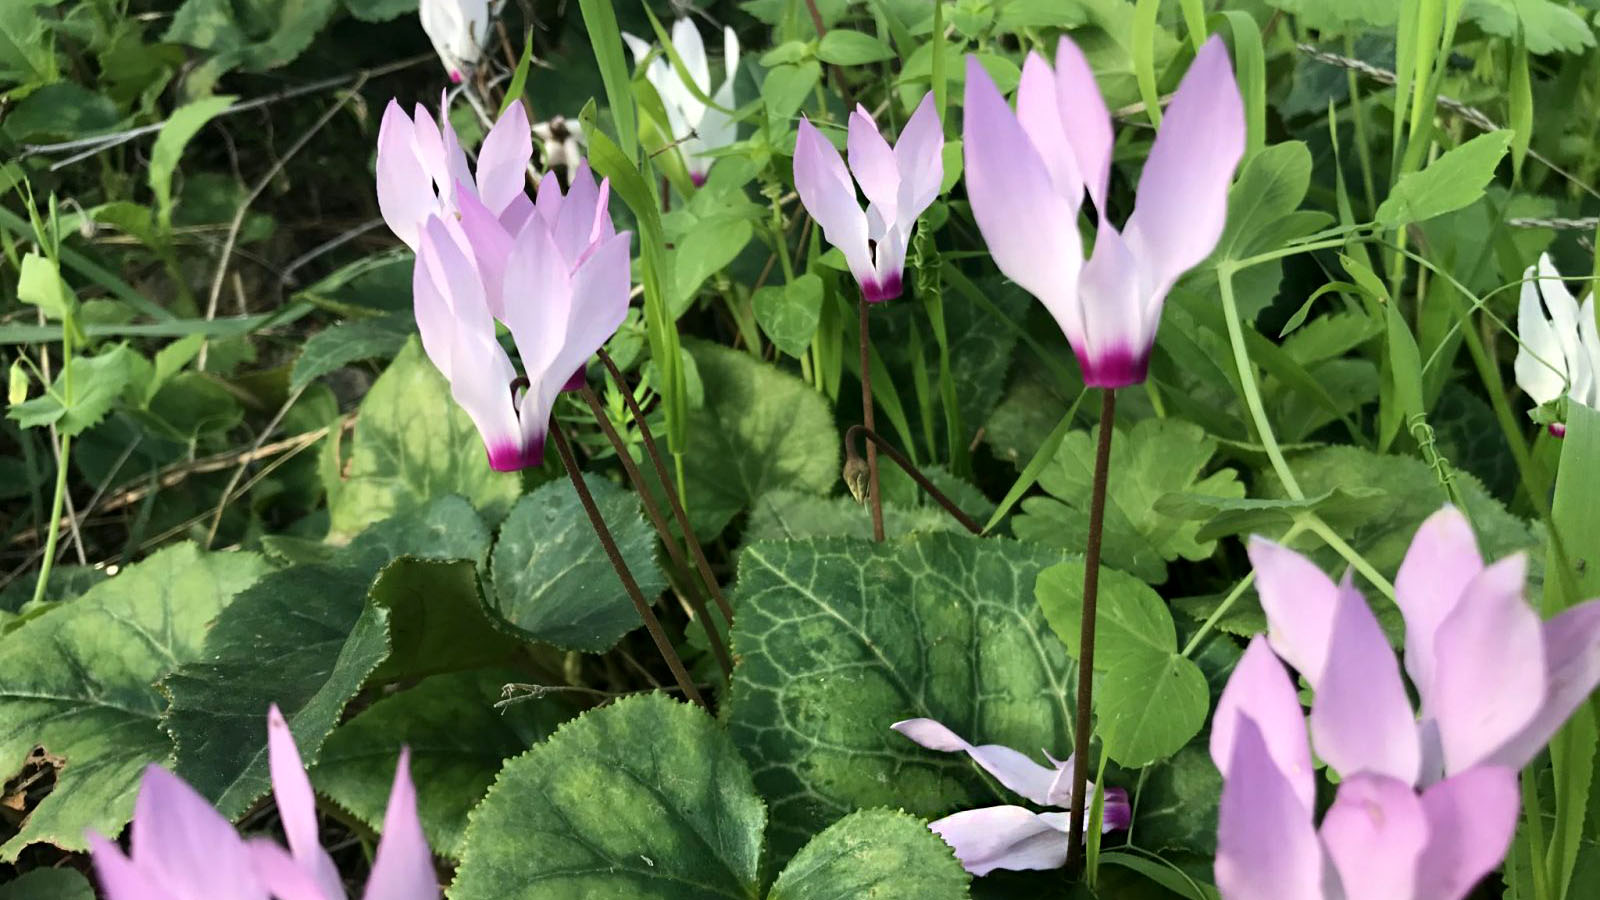 A close up of a cyclamen, or rakefet in Hebrew, in Horashim Forest. Photo by Nicky Blackburn.